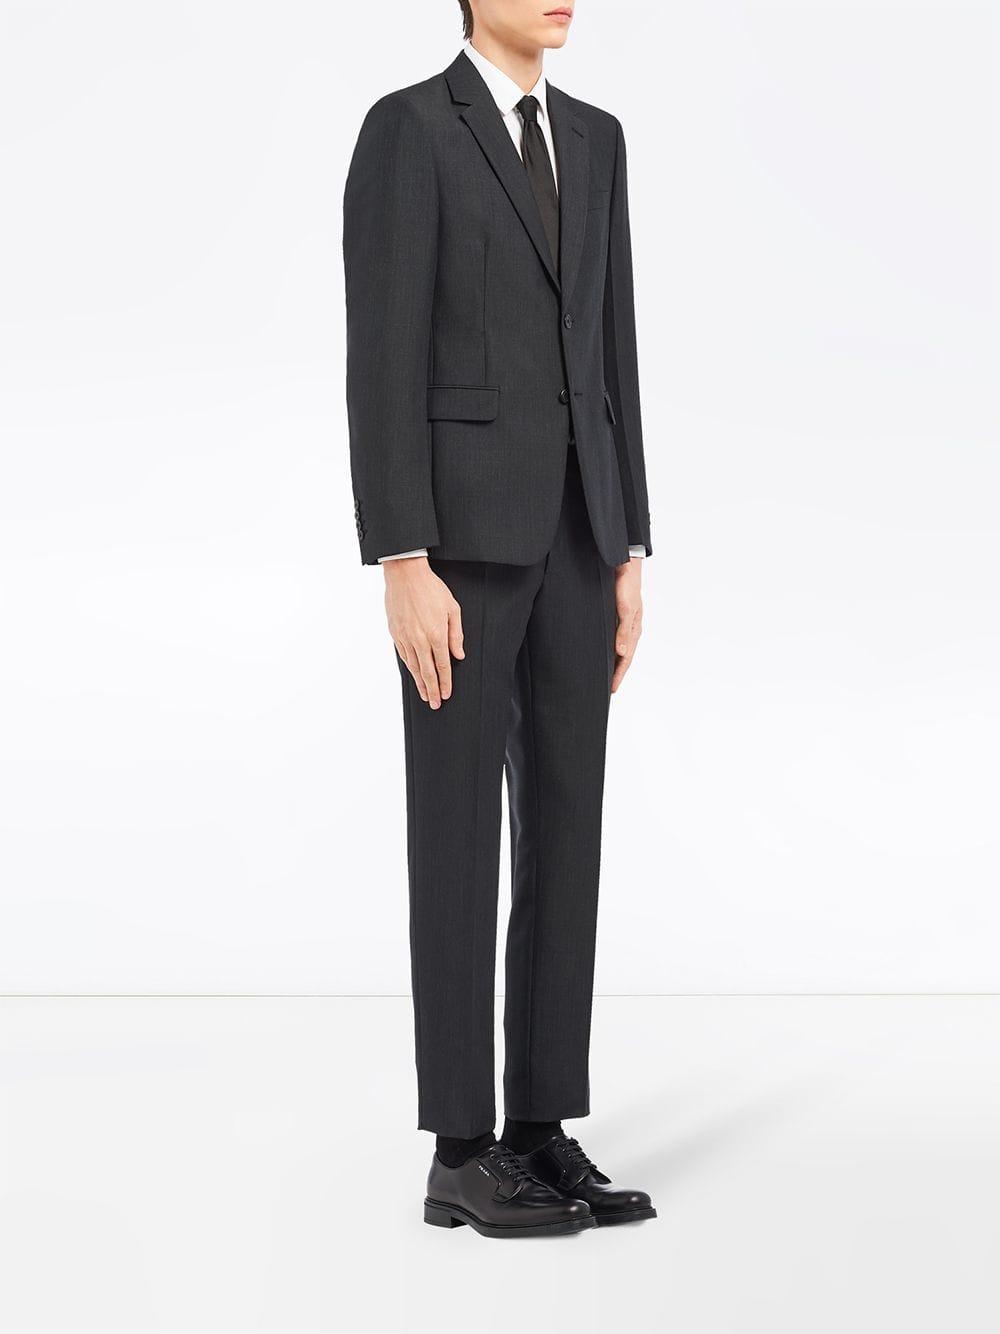 Prada Wool Classic Two-piece Suit in Grey (Gray) for Men - Lyst